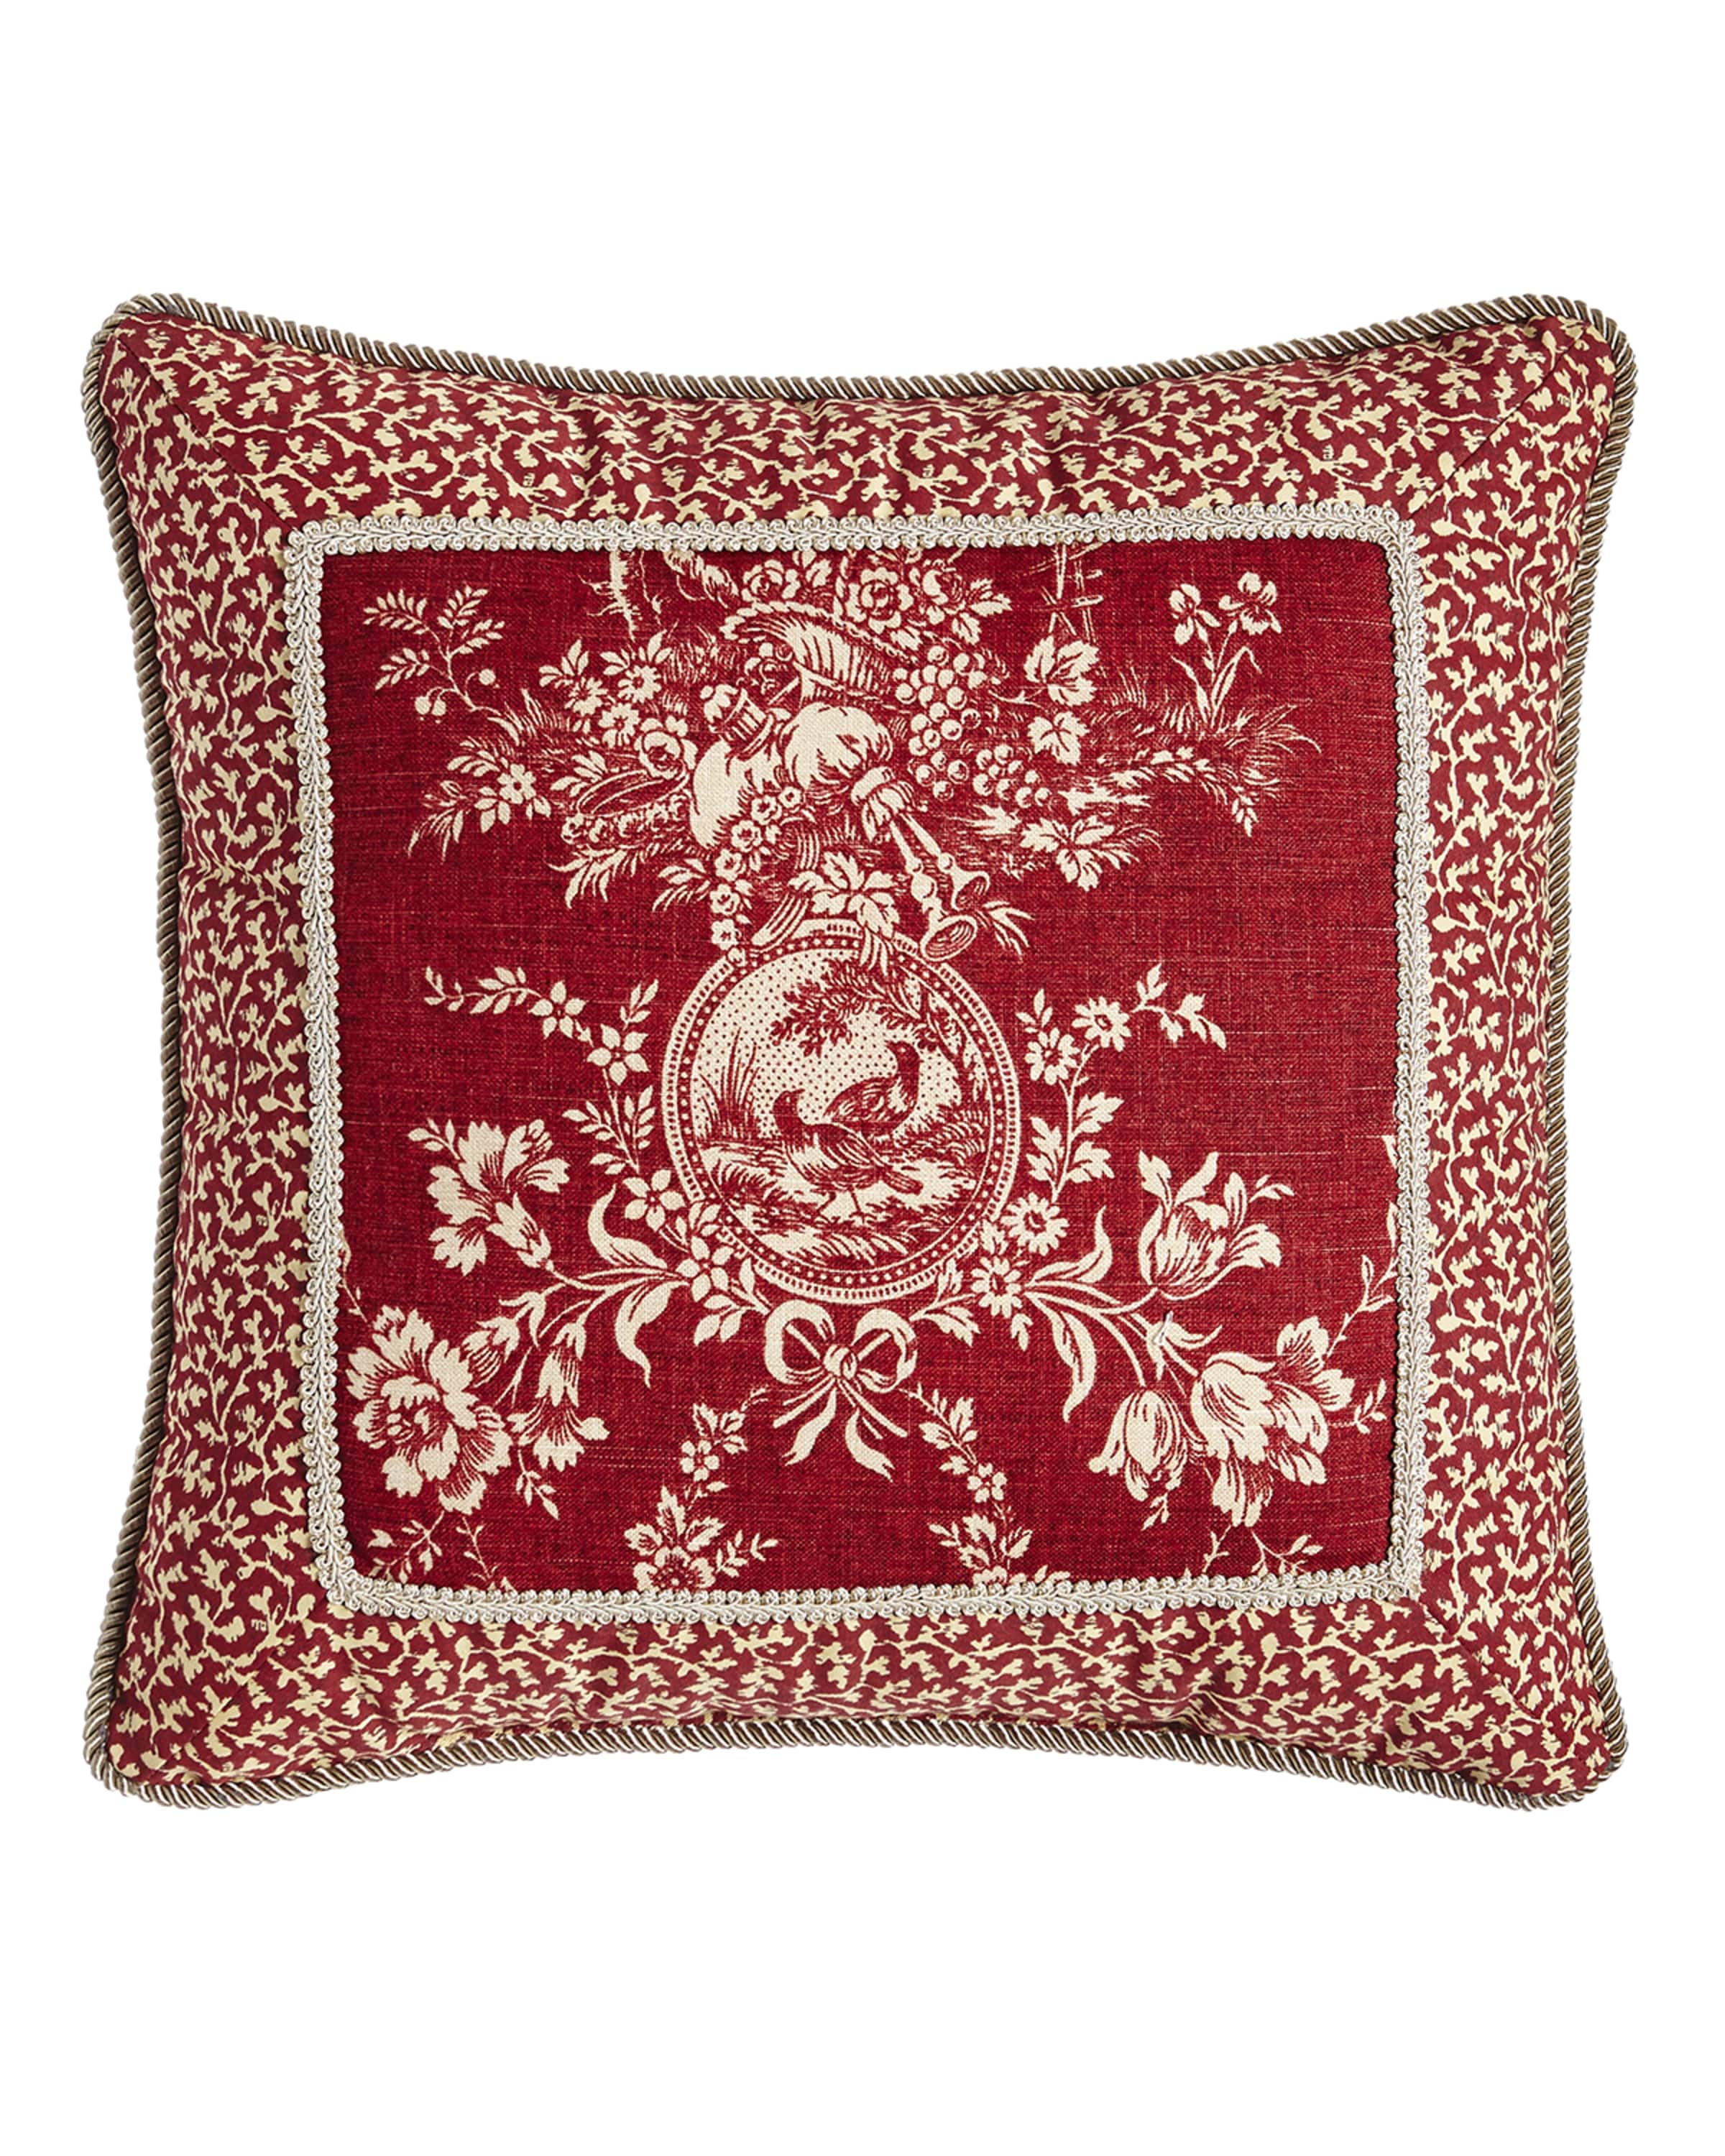 Sherry Kline Home French Country Pillow w/ Toile Center, 19"Sq.